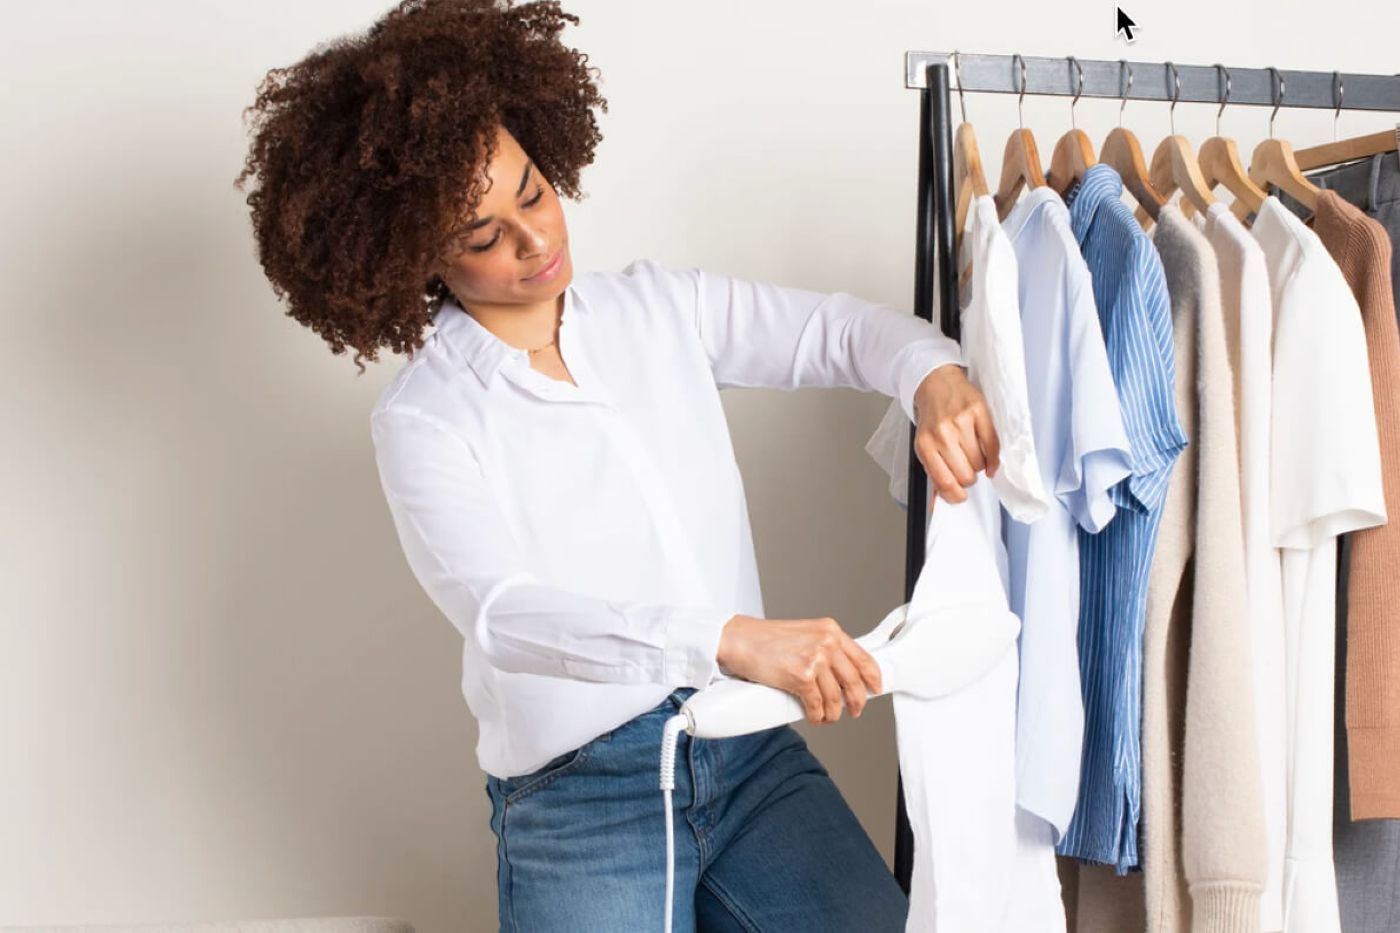 Steaming: How to Use a Garment Steamer - Nori Press